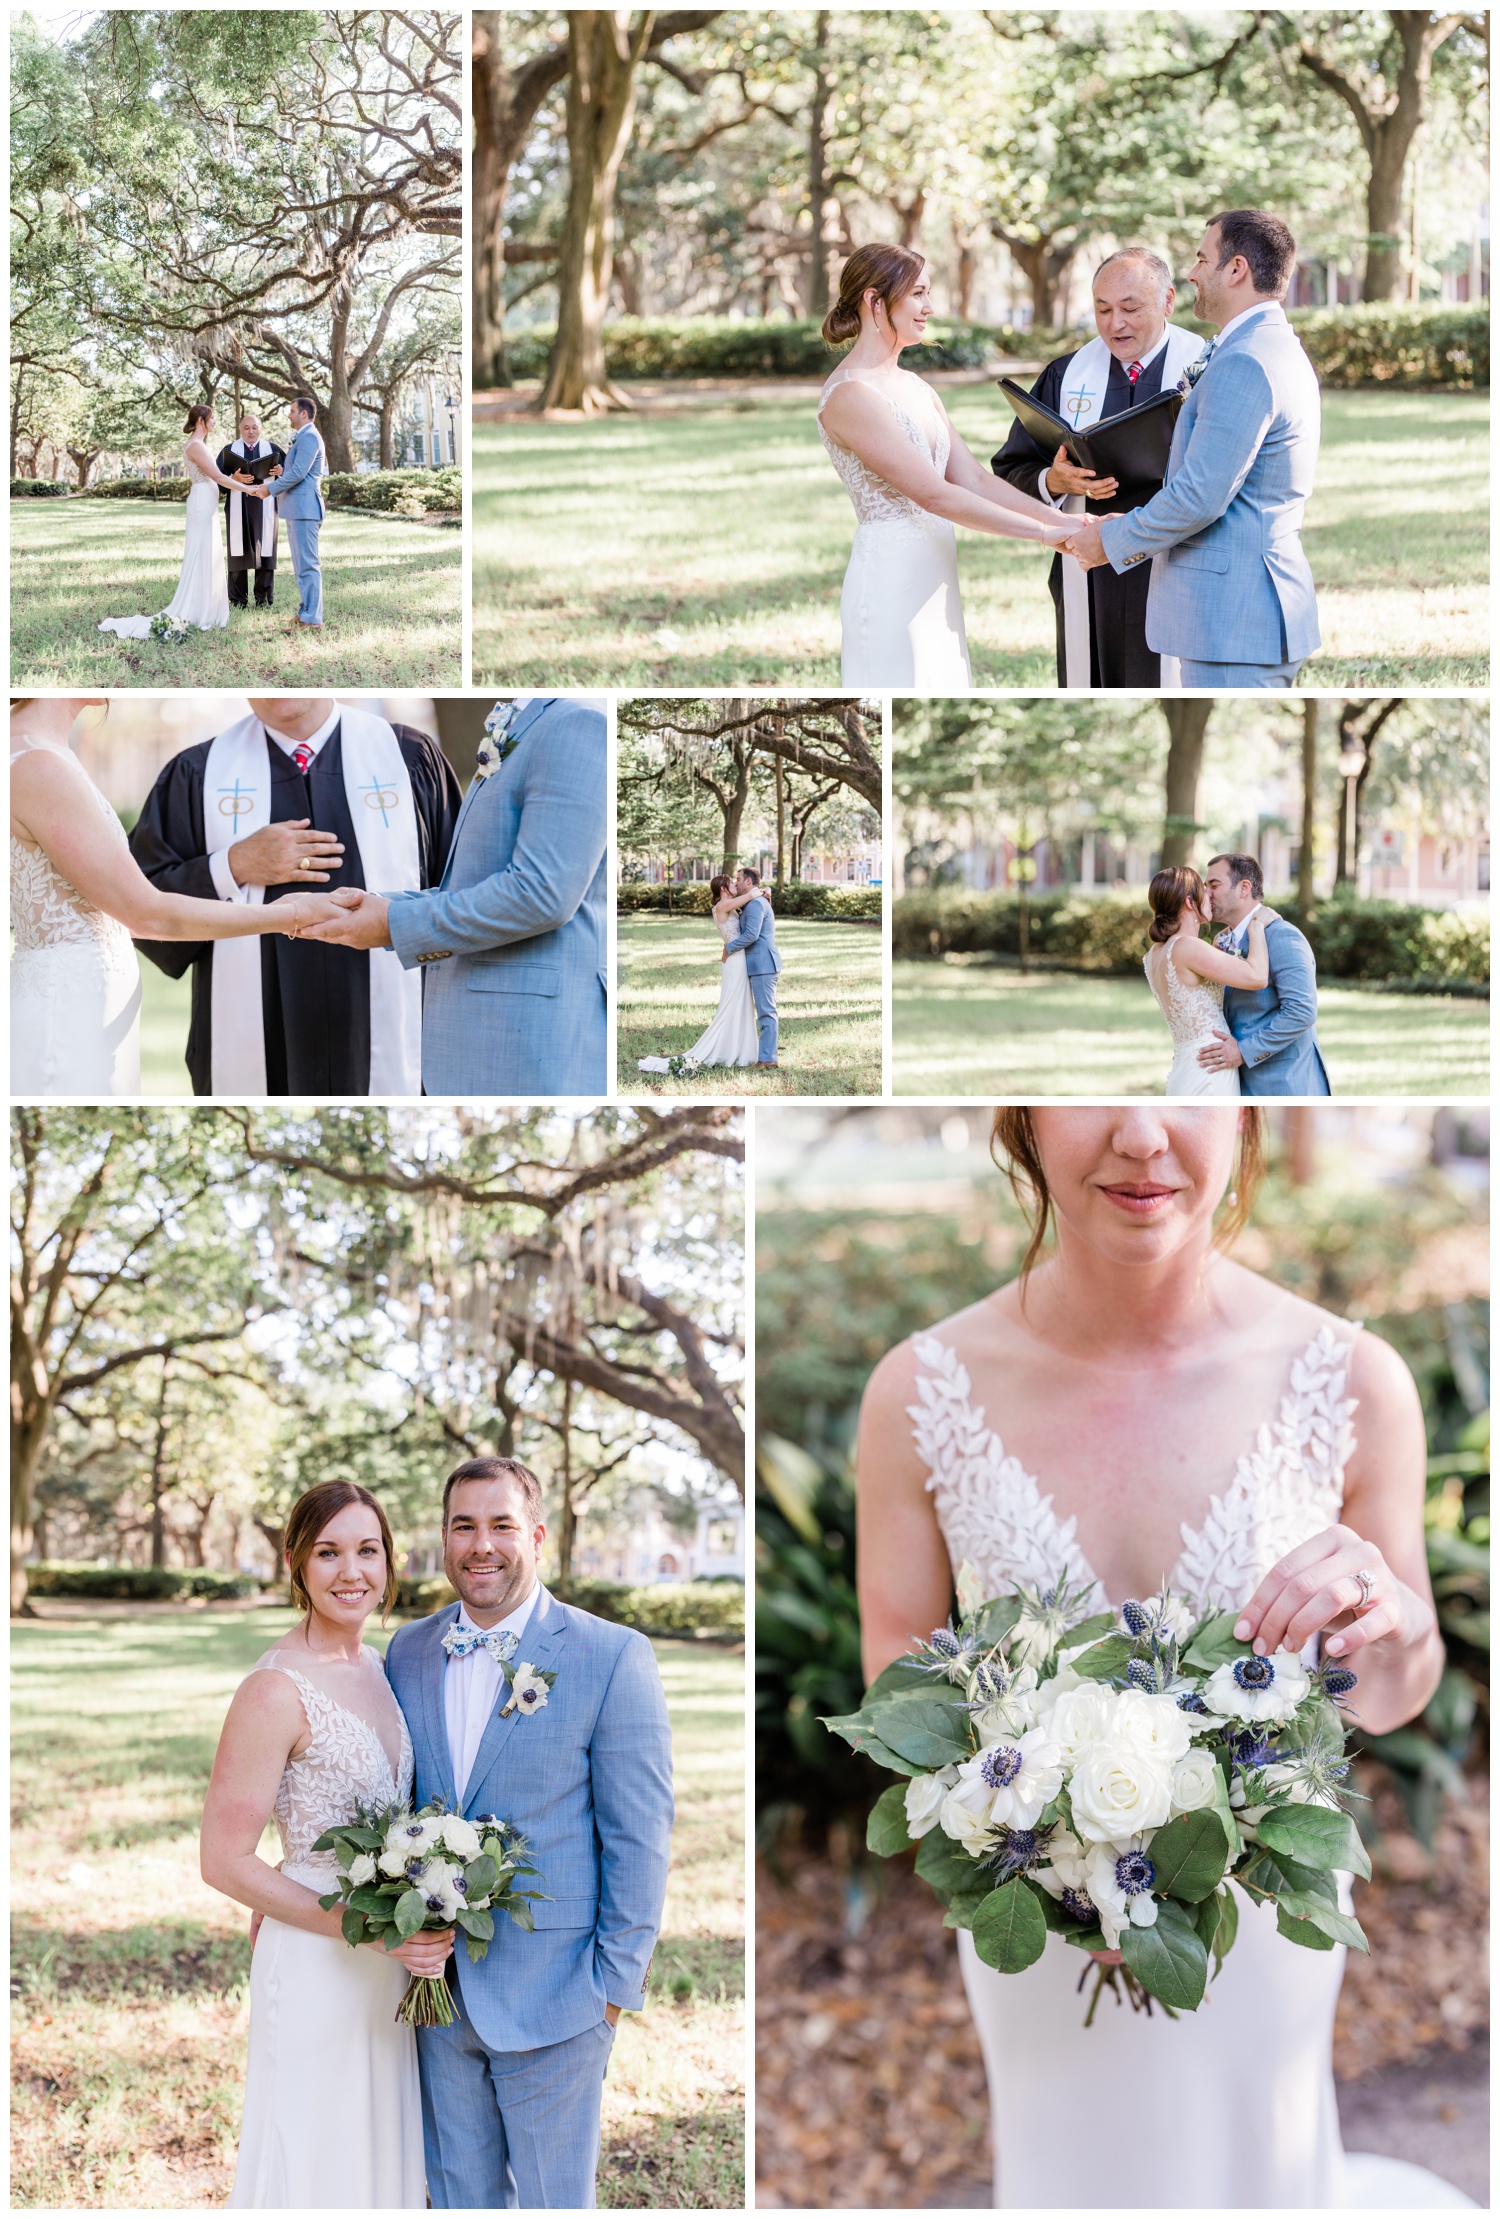 Classic Elopement in Forsyth Park - officiating by Reverend Joe - taylor brown photography - flowers by ivory and beau